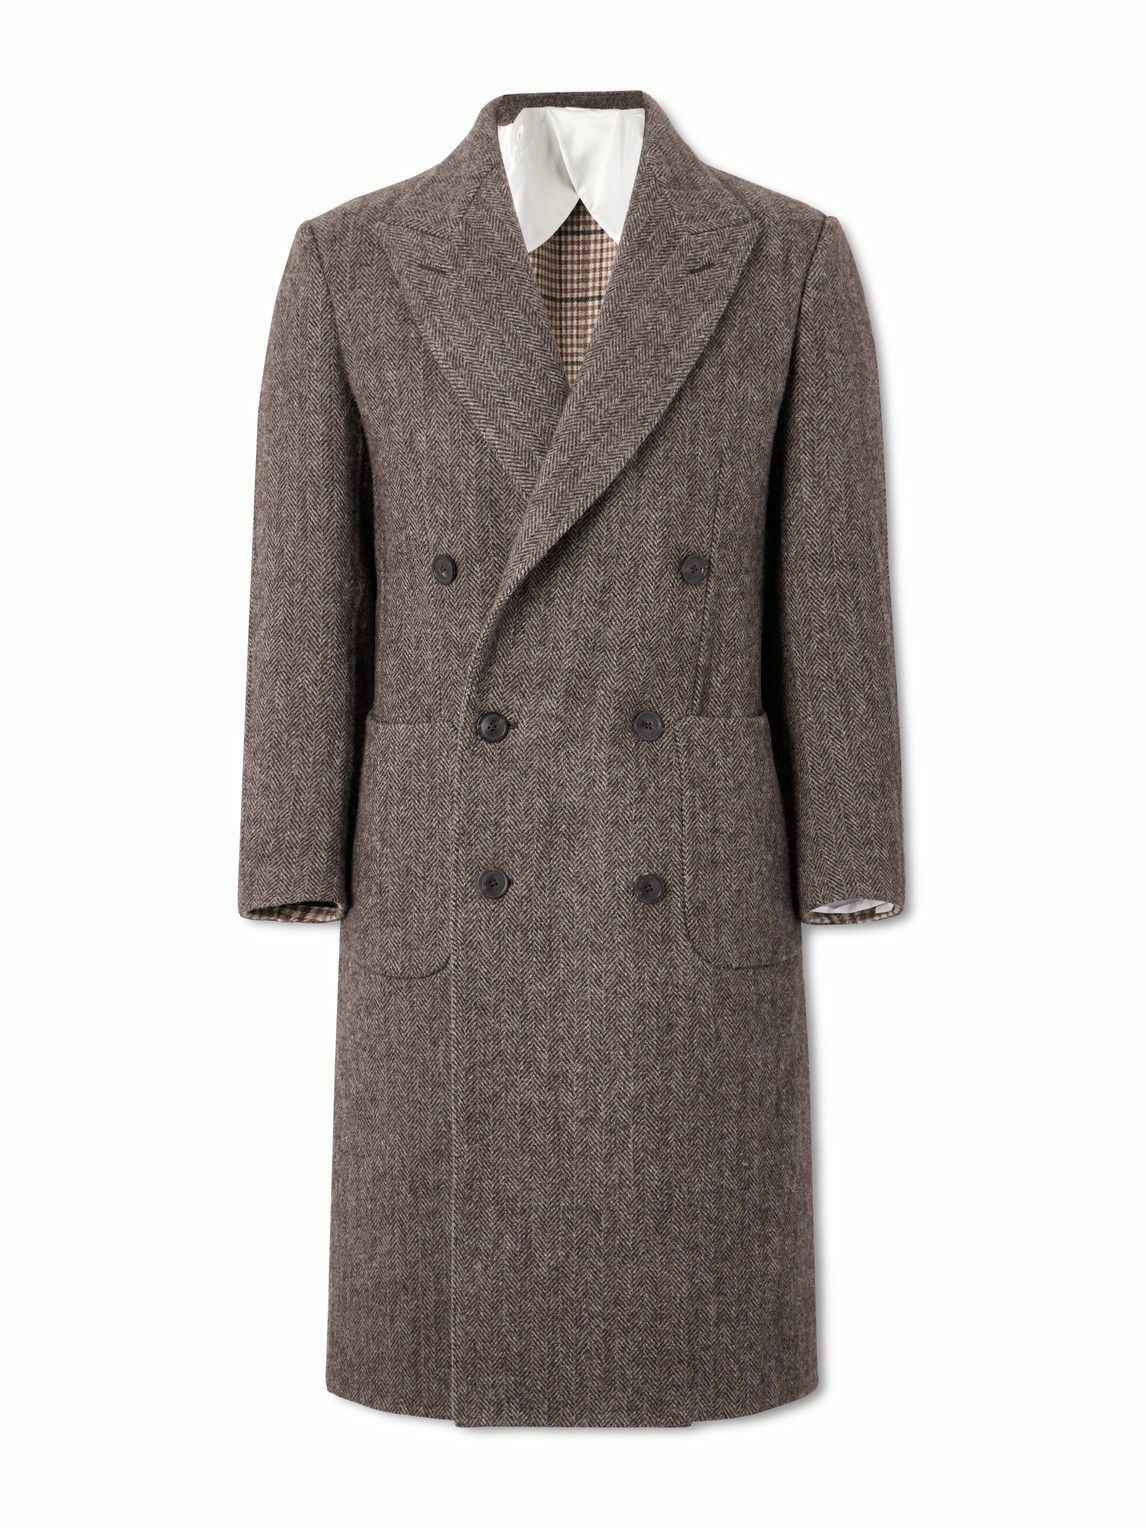 Purdey - Town and Country Double-Breasted Herringbone Wool Coat - Brown ...